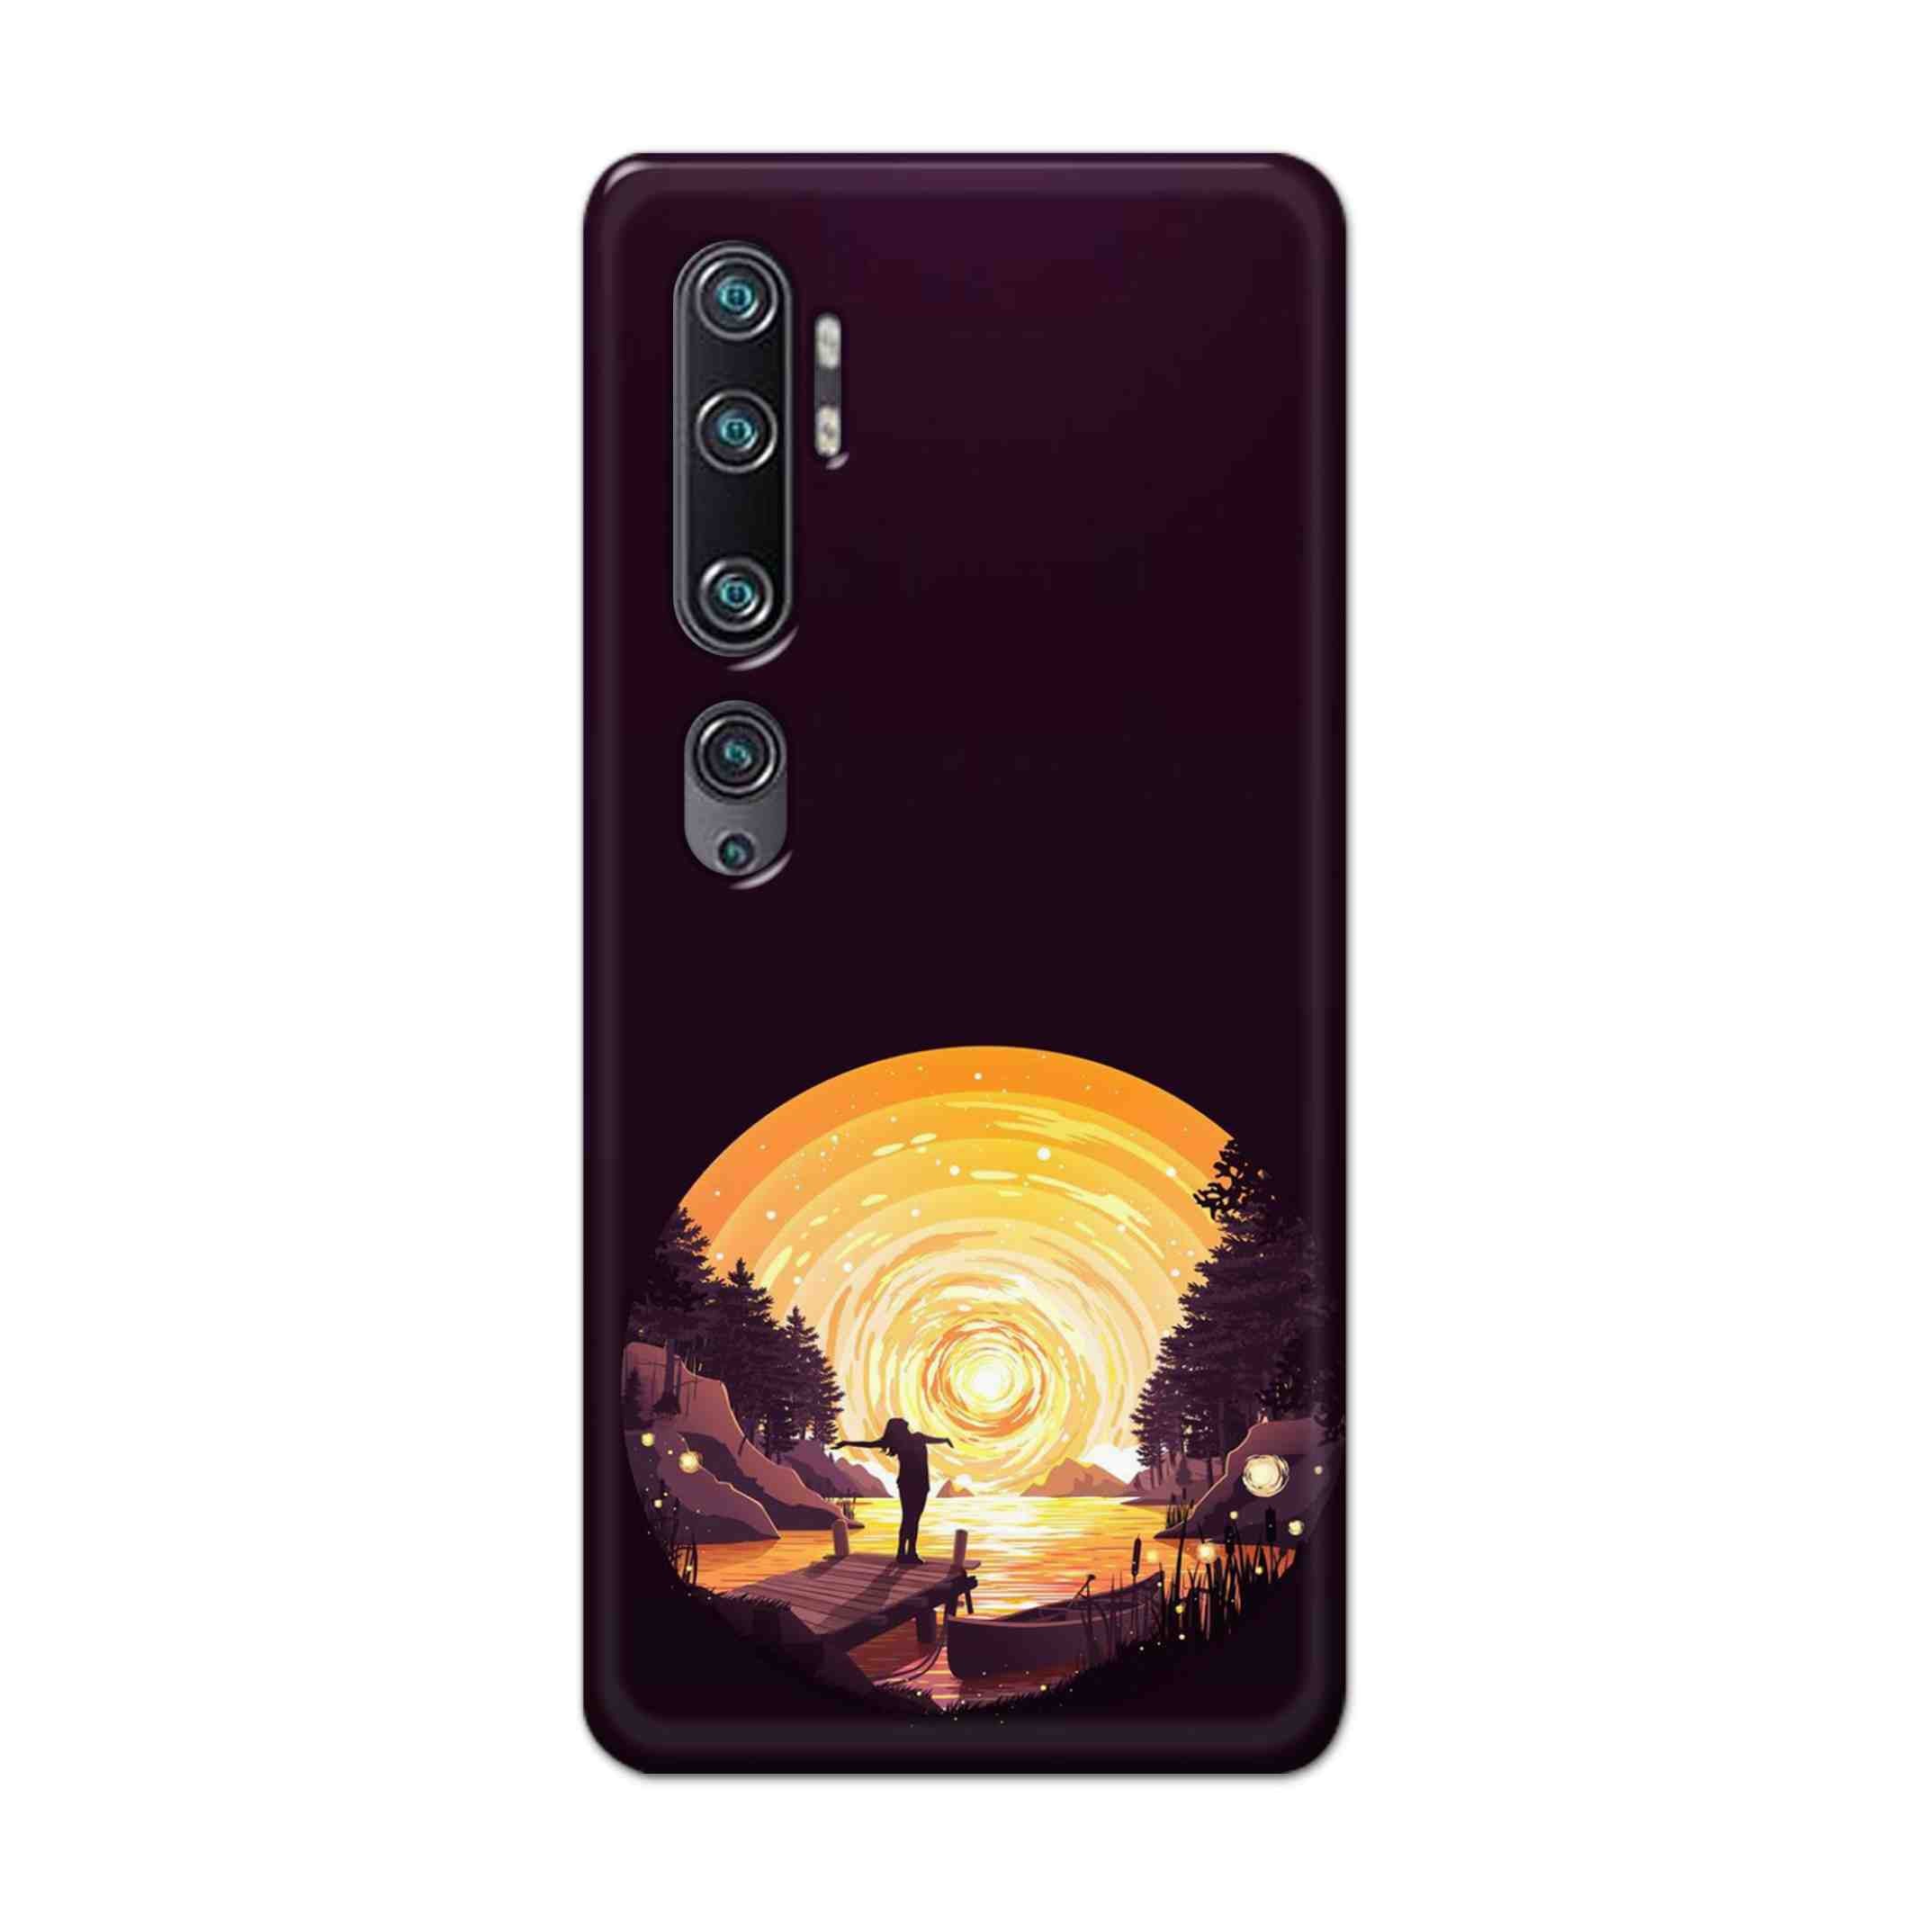 Buy Night Sunrise Hard Back Mobile Phone Case Cover For Xiaomi Mi Note 10 Online